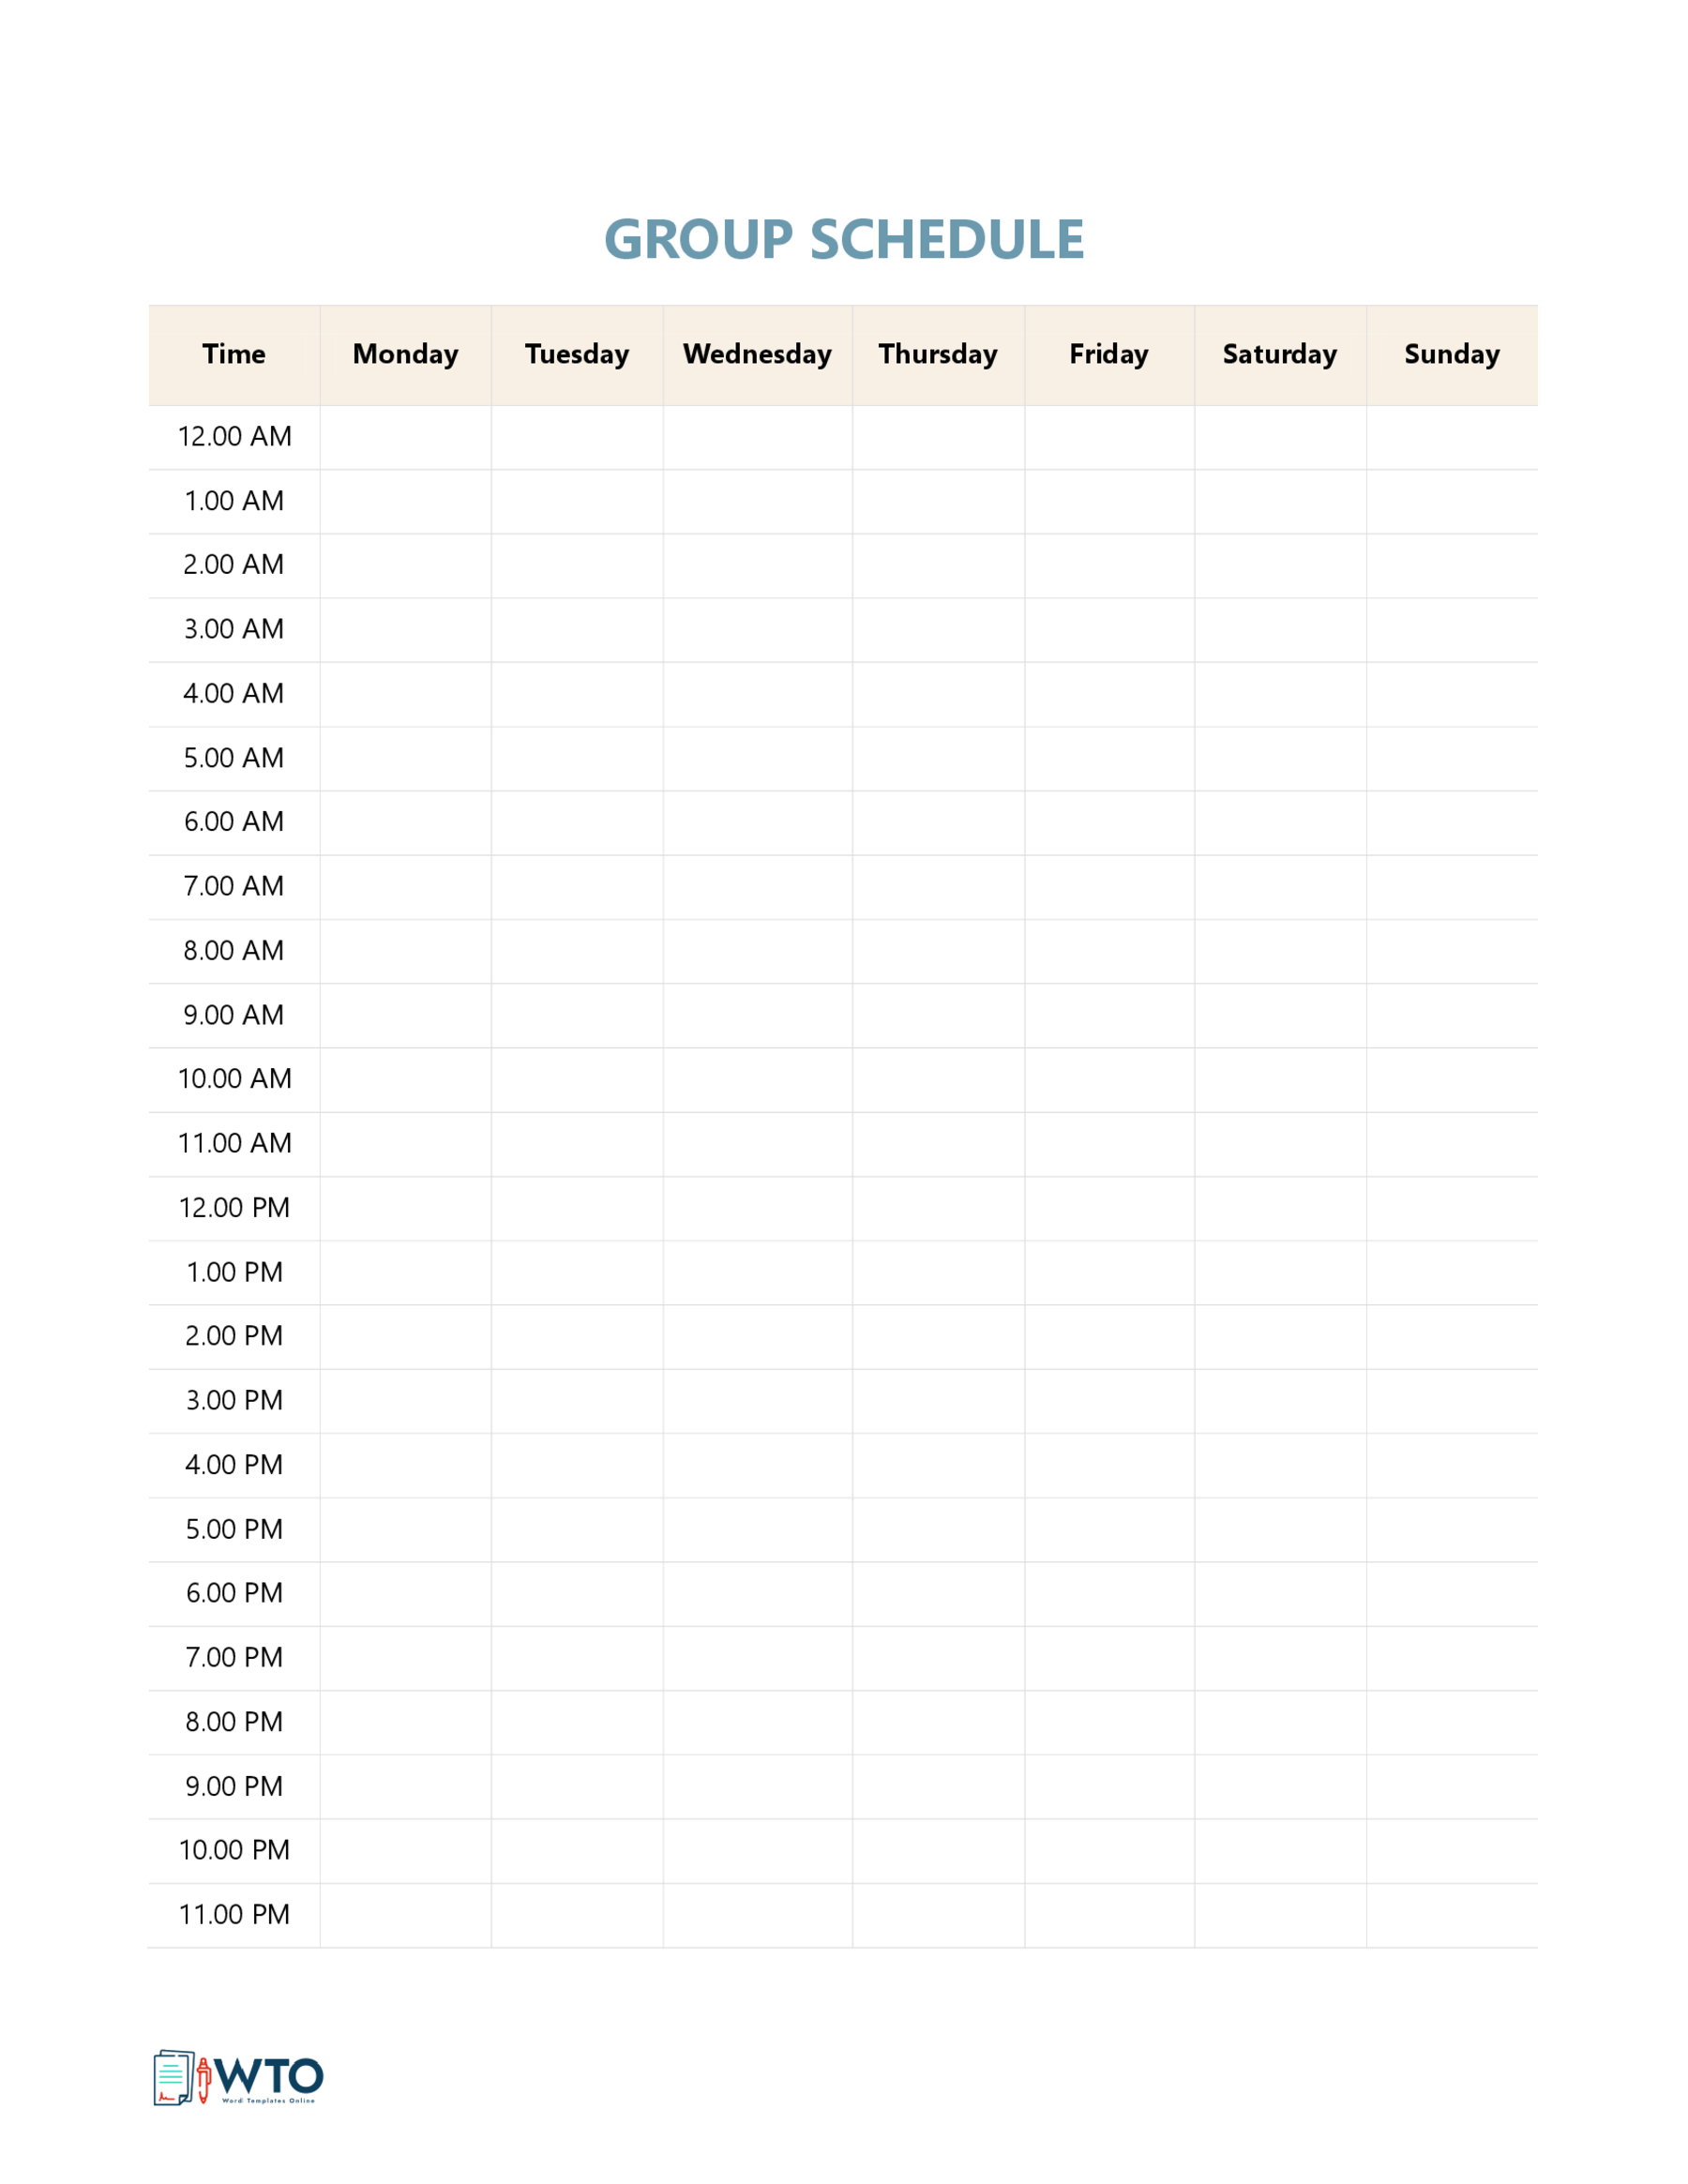 "Free Group Schedules Template - Editable Format